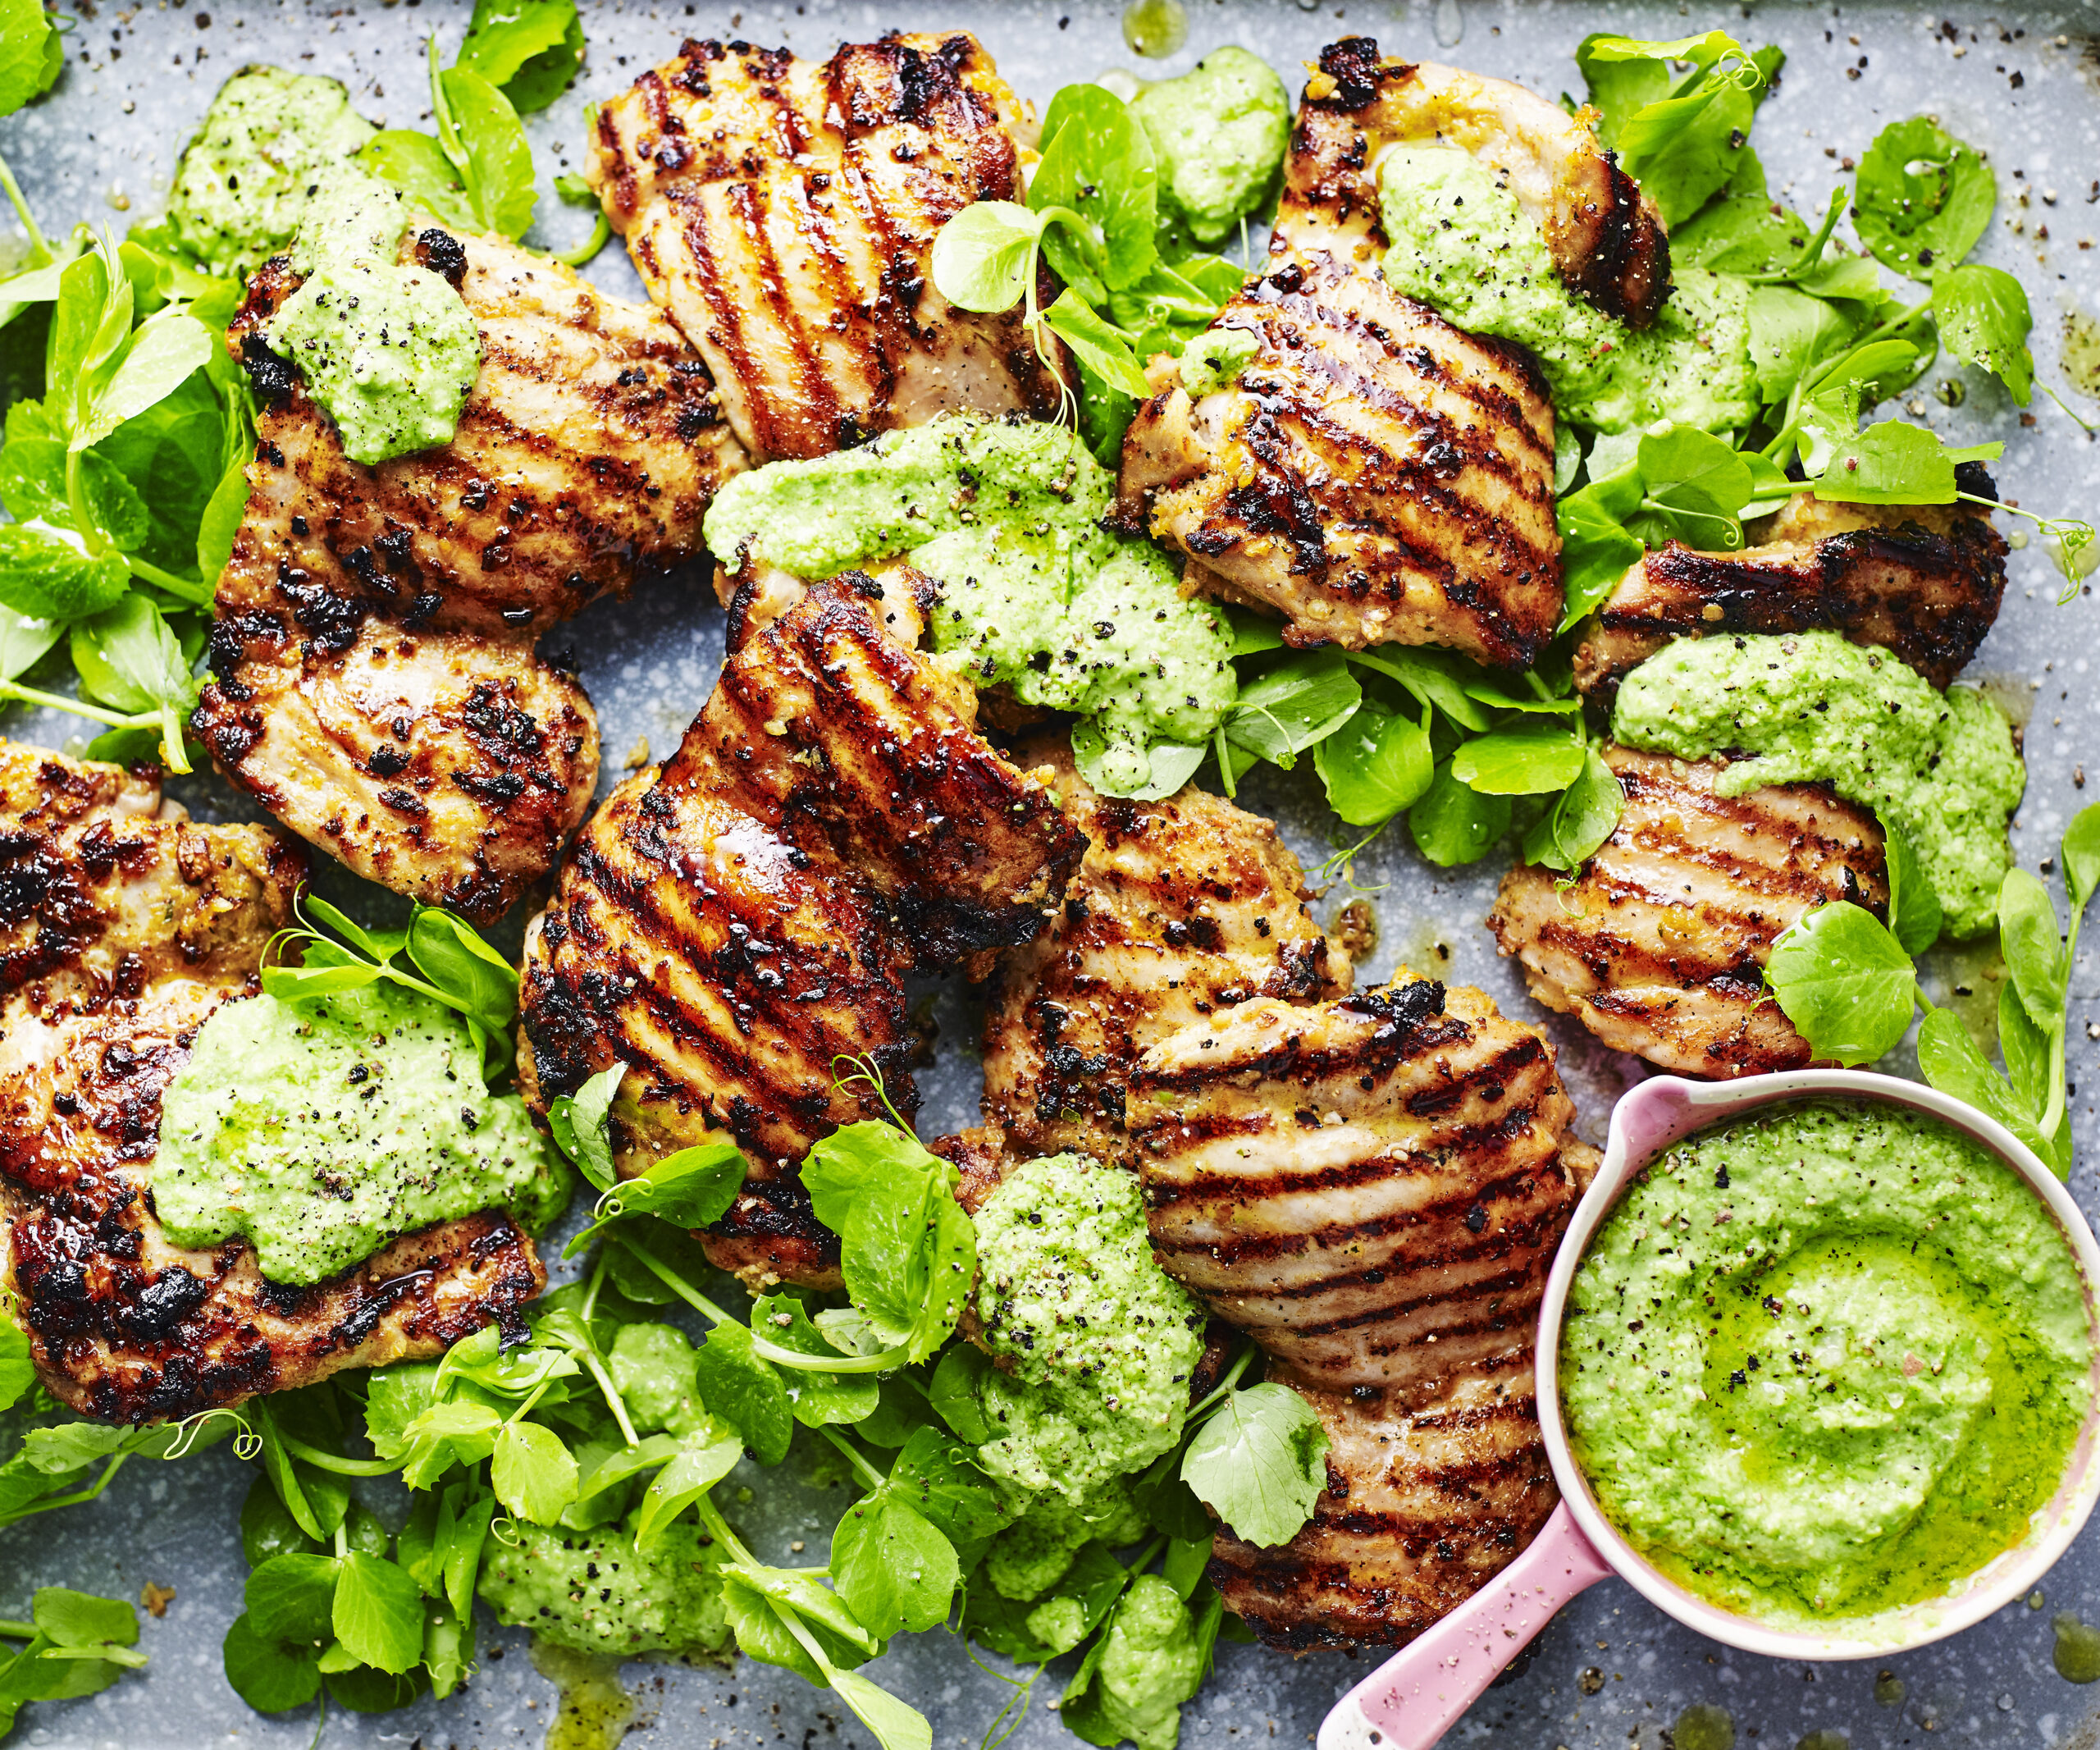 Barbecued chermoula chicken with pea puree